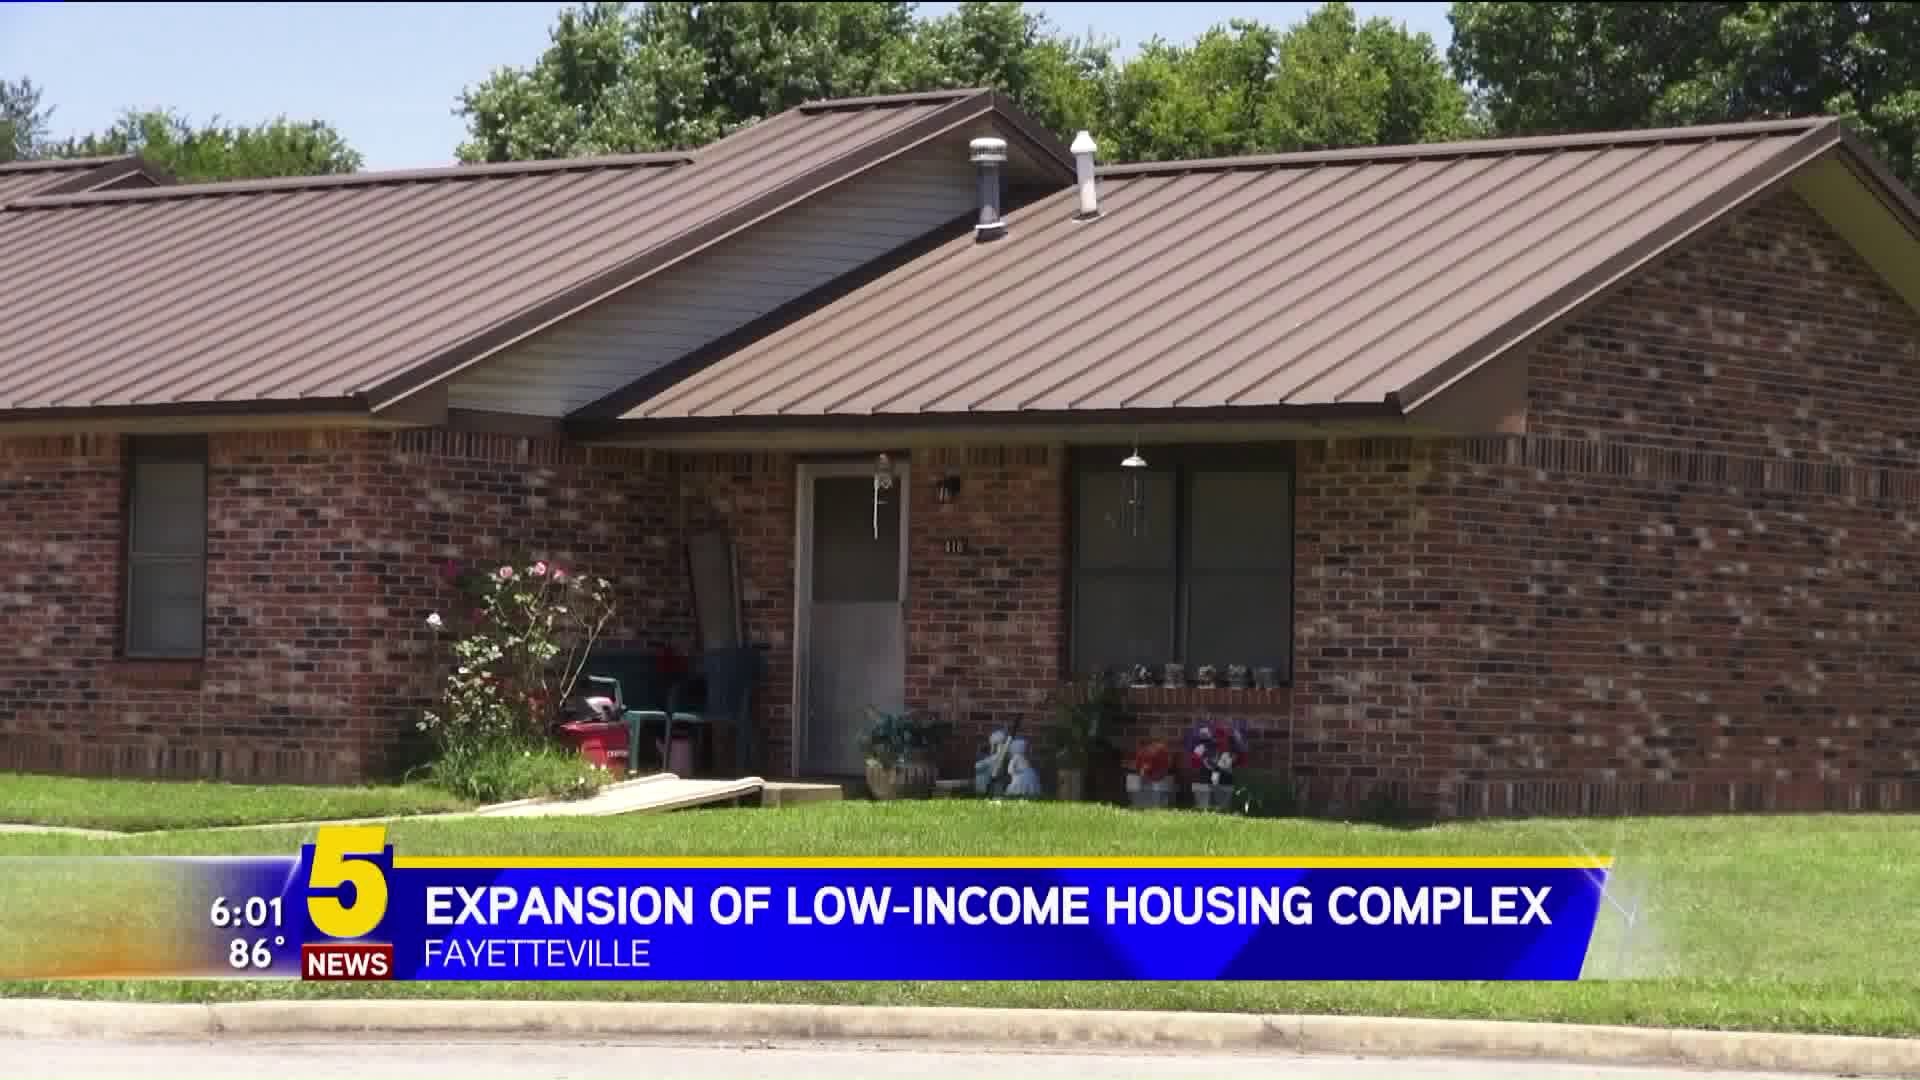 Expansion Of Low-Income Housing Complex